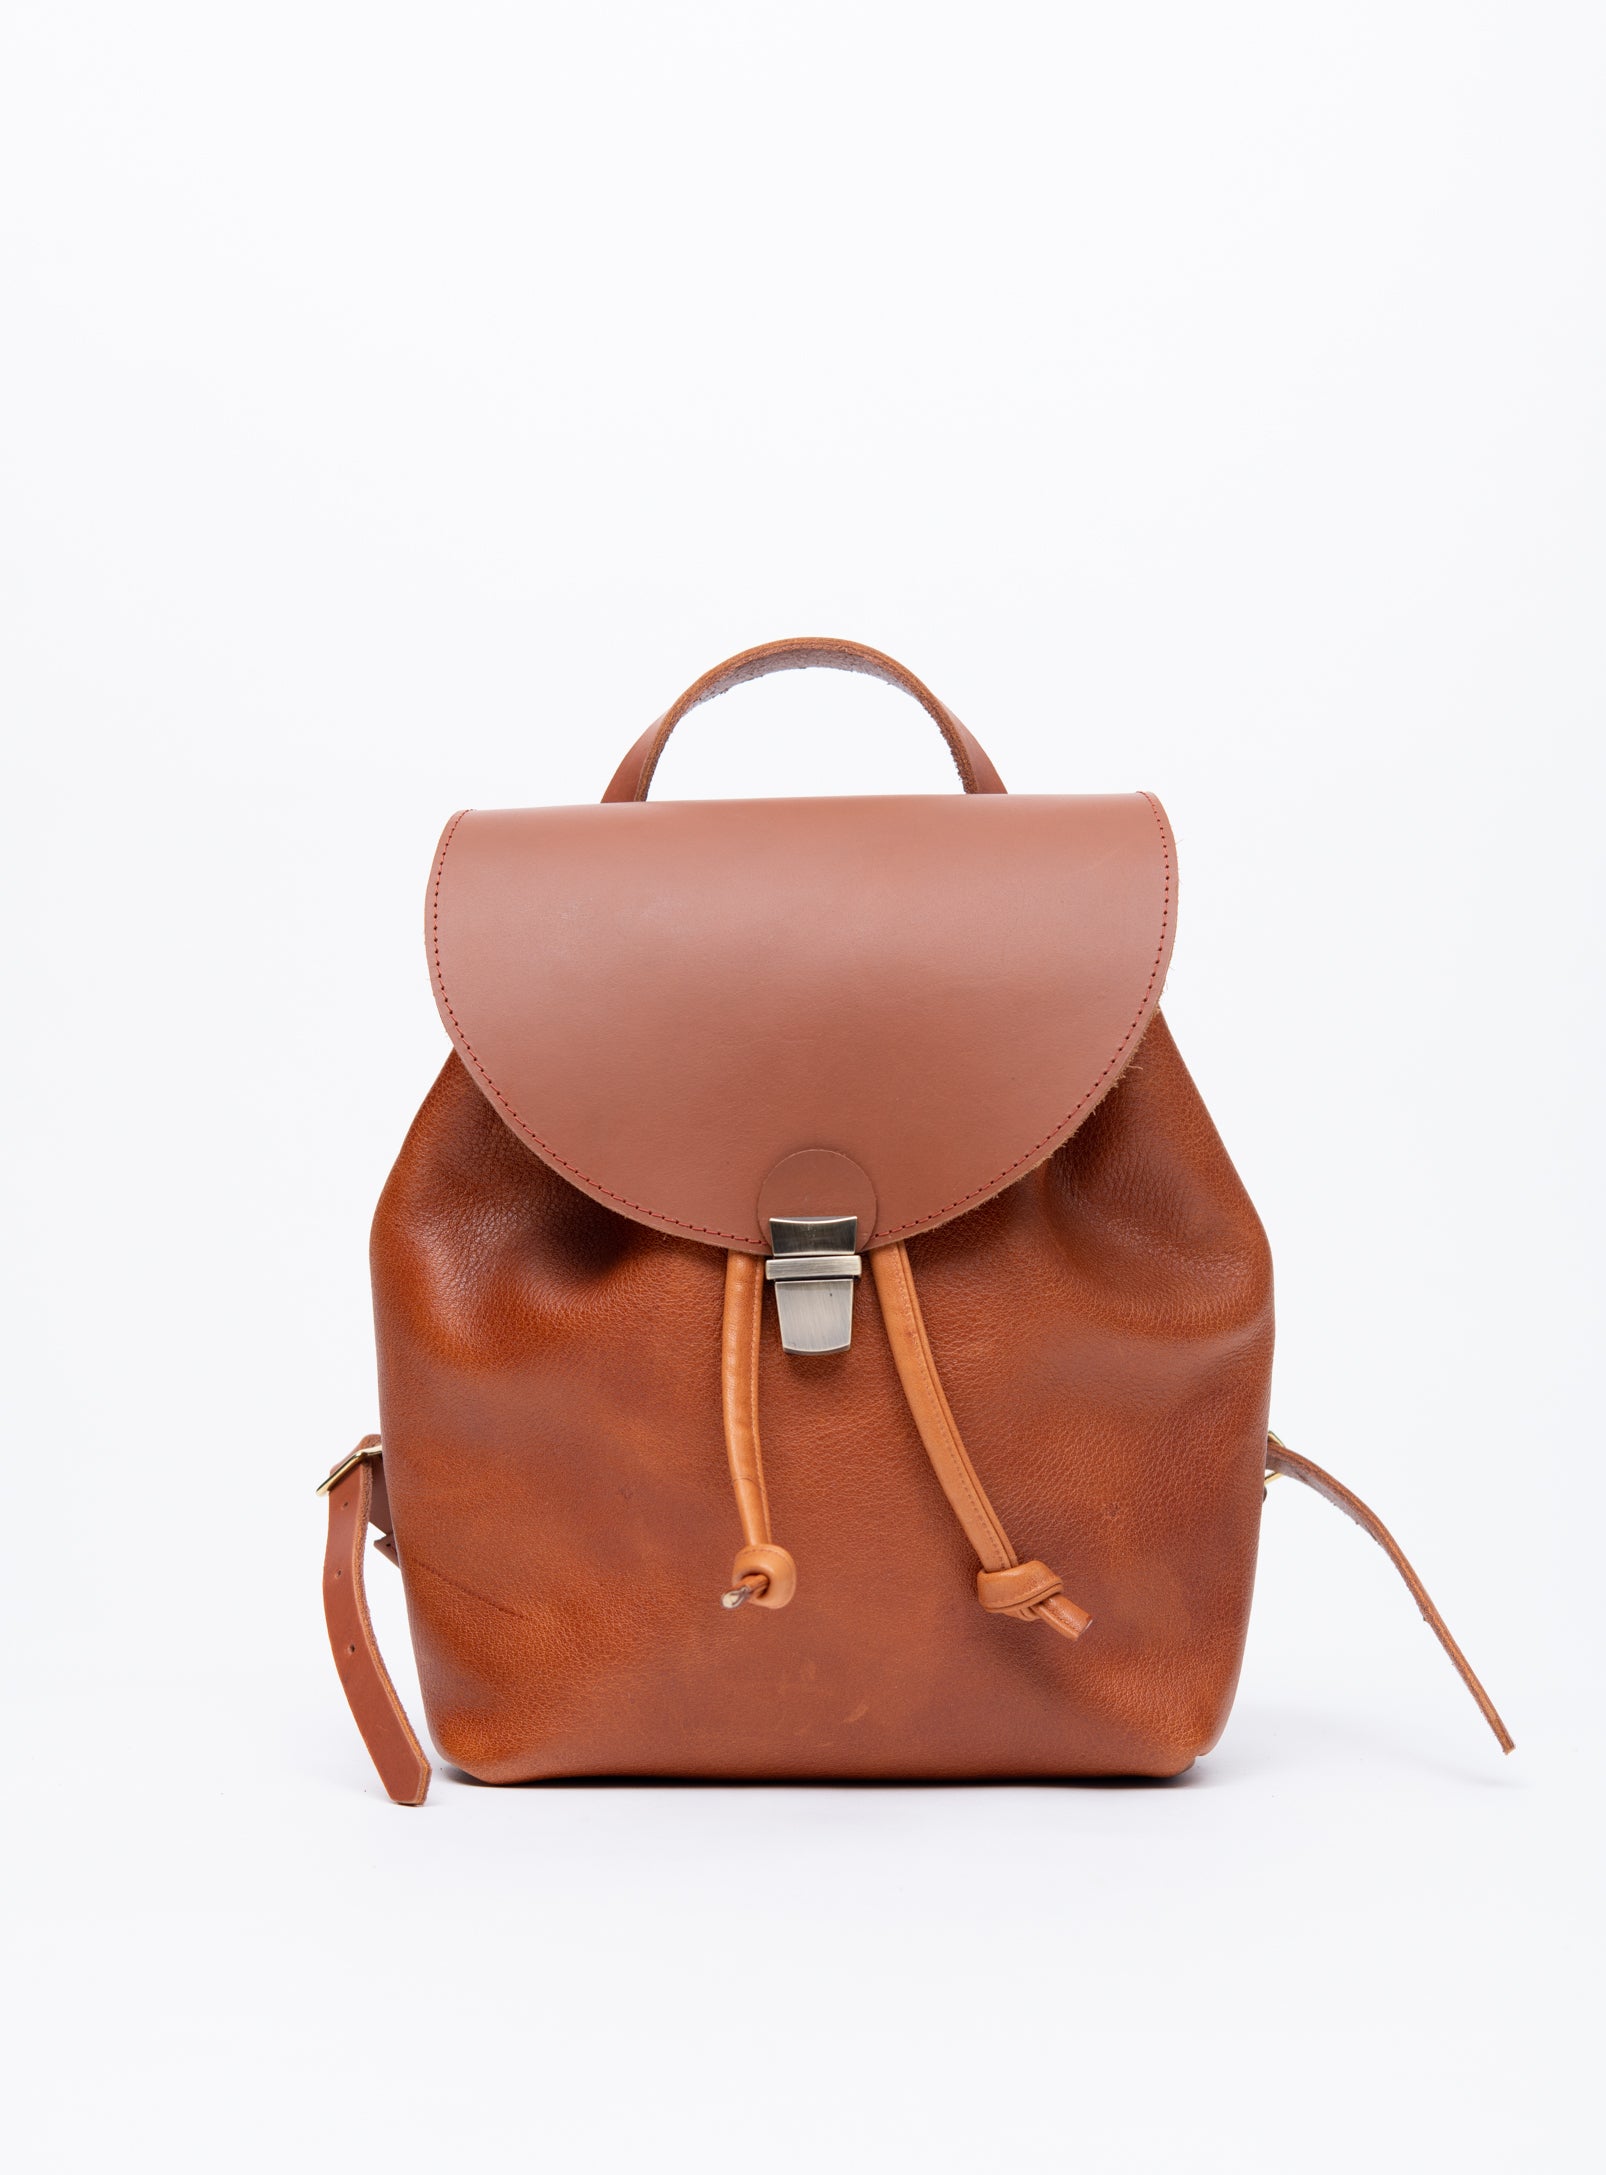 Veinage Leather Rucksack MILAN Model Small, handmade in Montreal, Canada